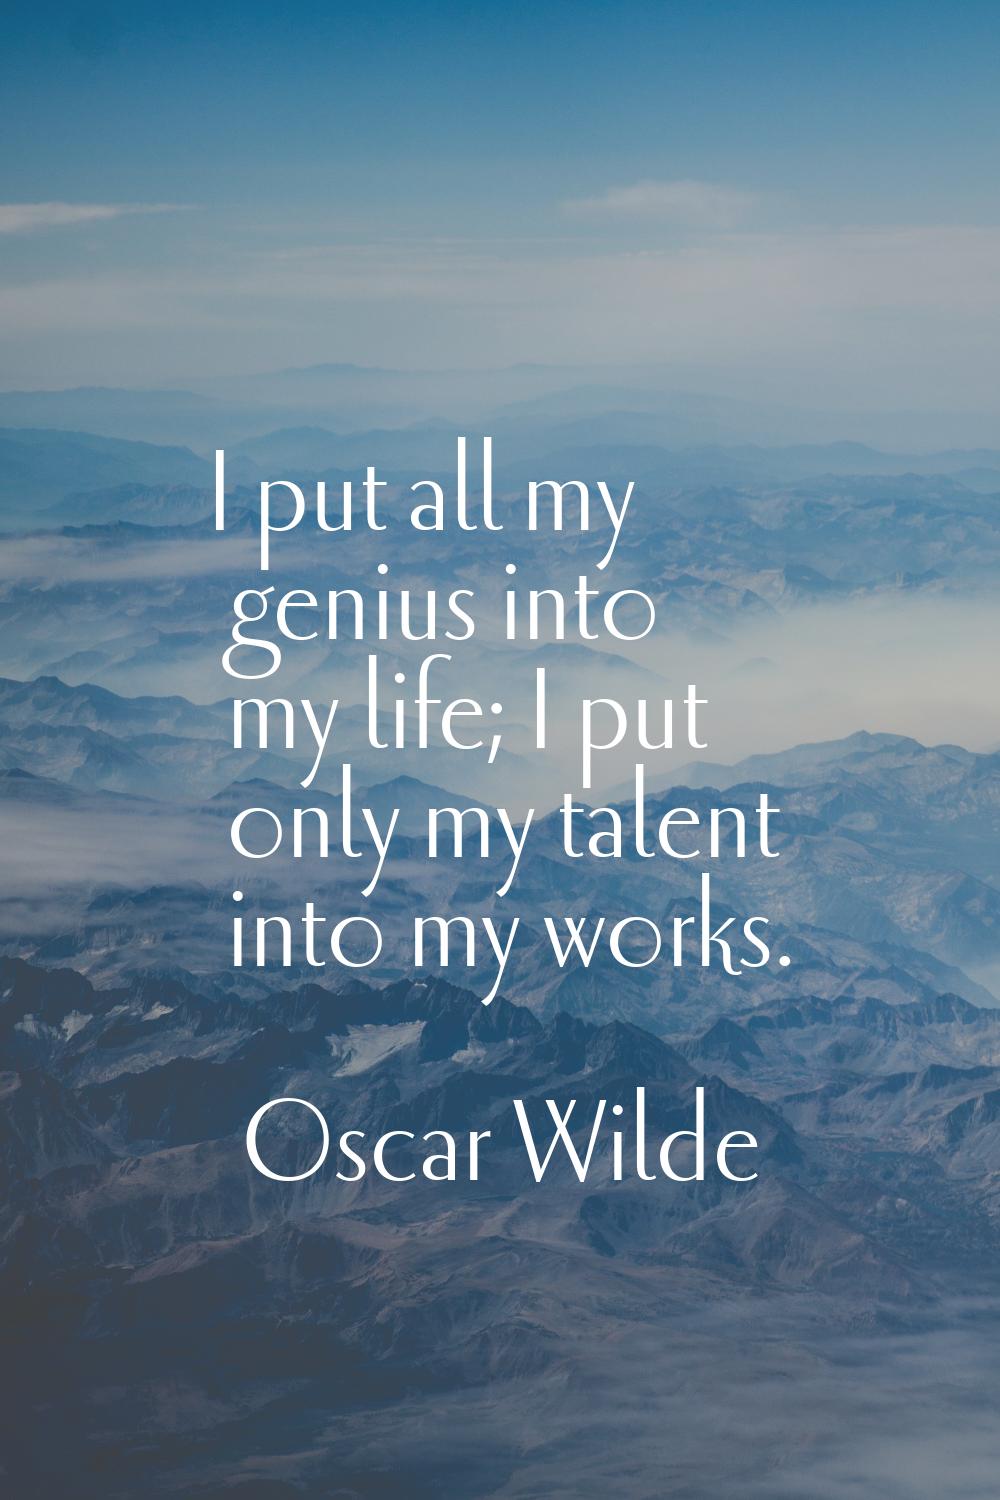 I put all my genius into my life; I put only my talent into my works.